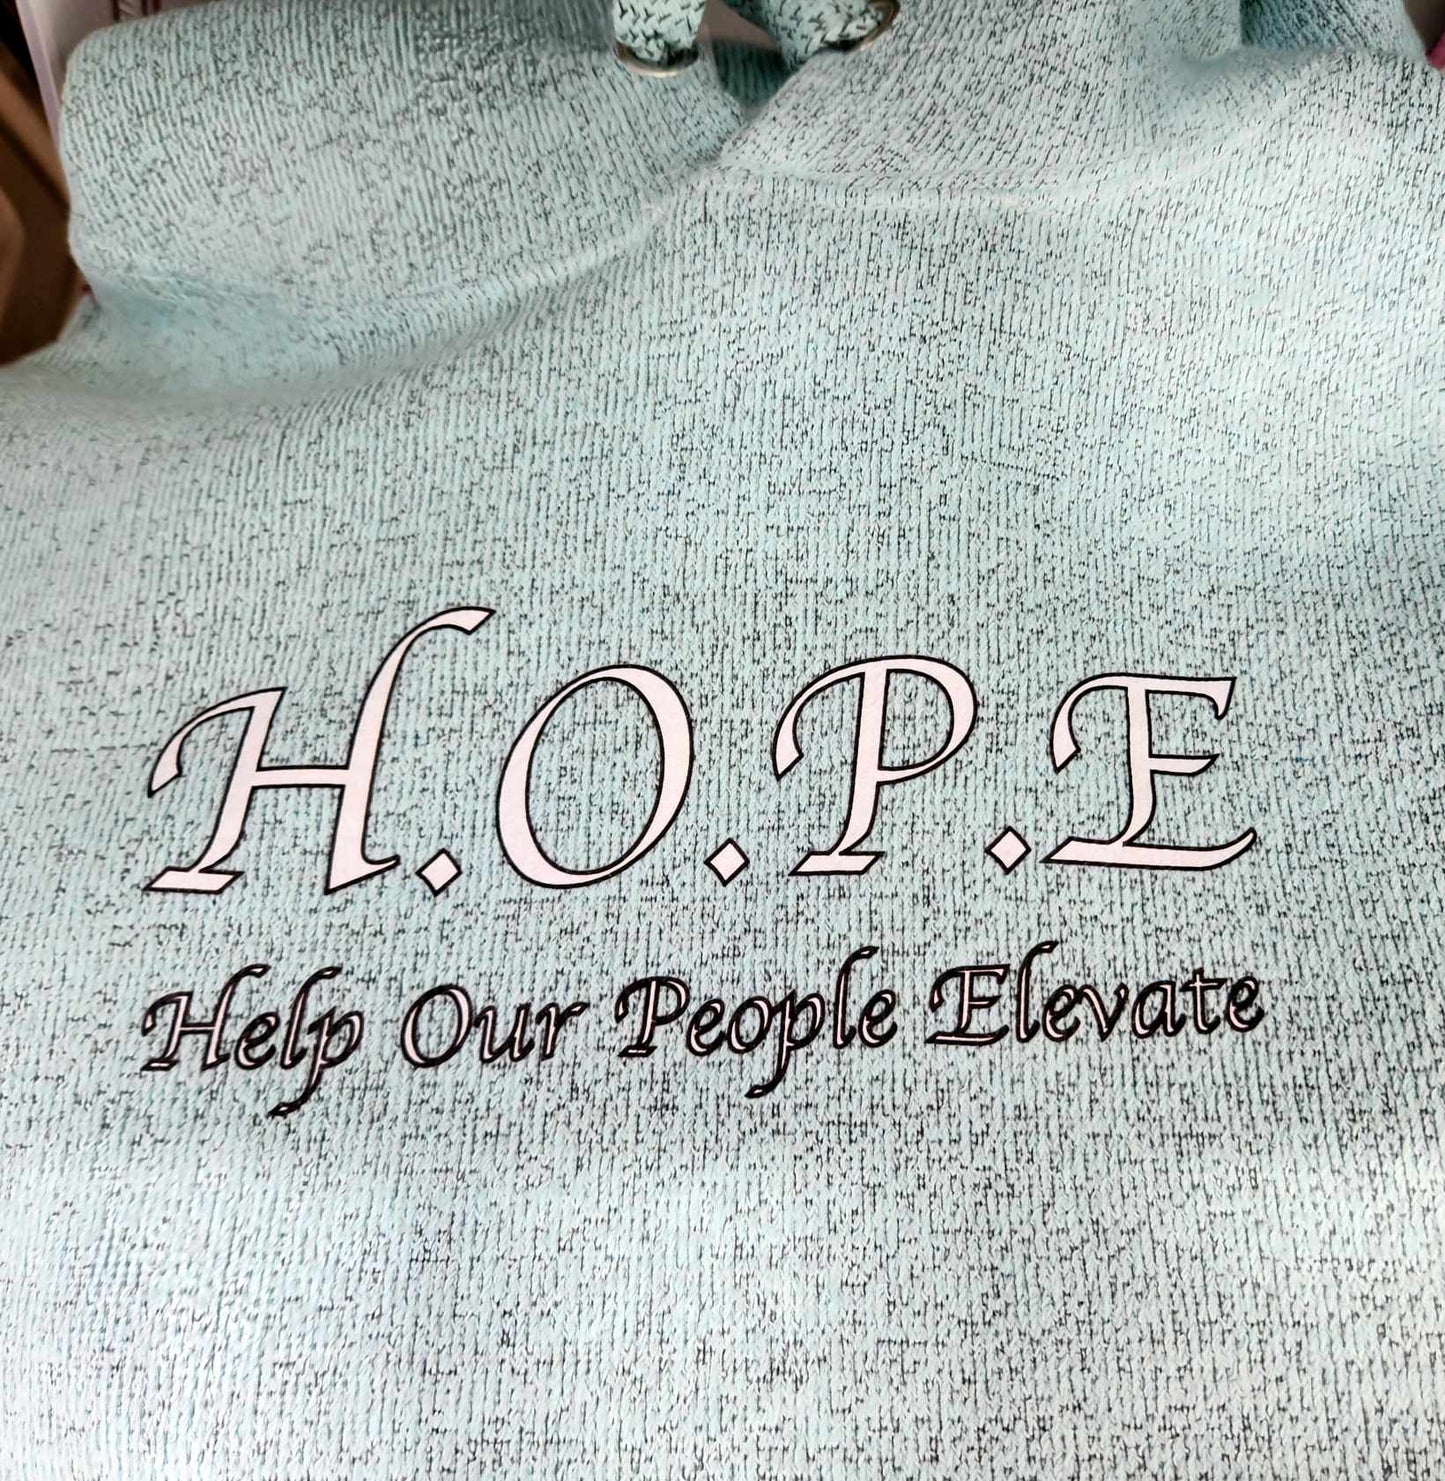 H.O.P.E - Help Our People Elevate